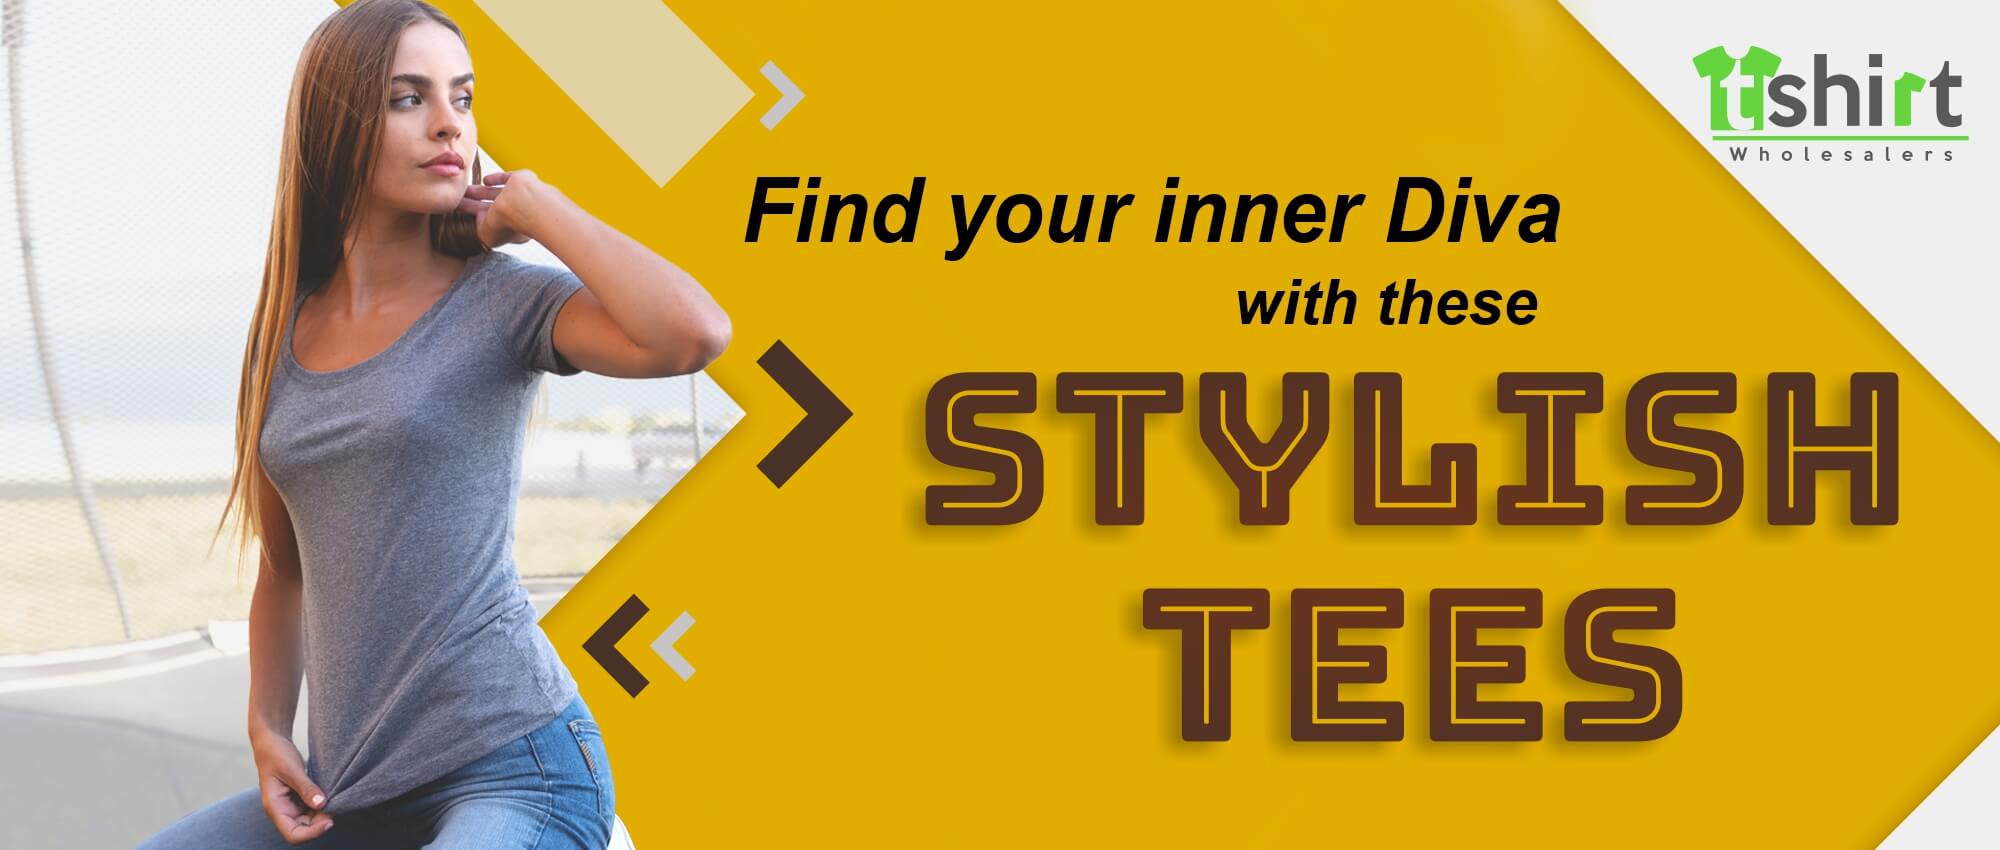 FIND YOUR INNER DIVA WITH THESE STYLISH TEES